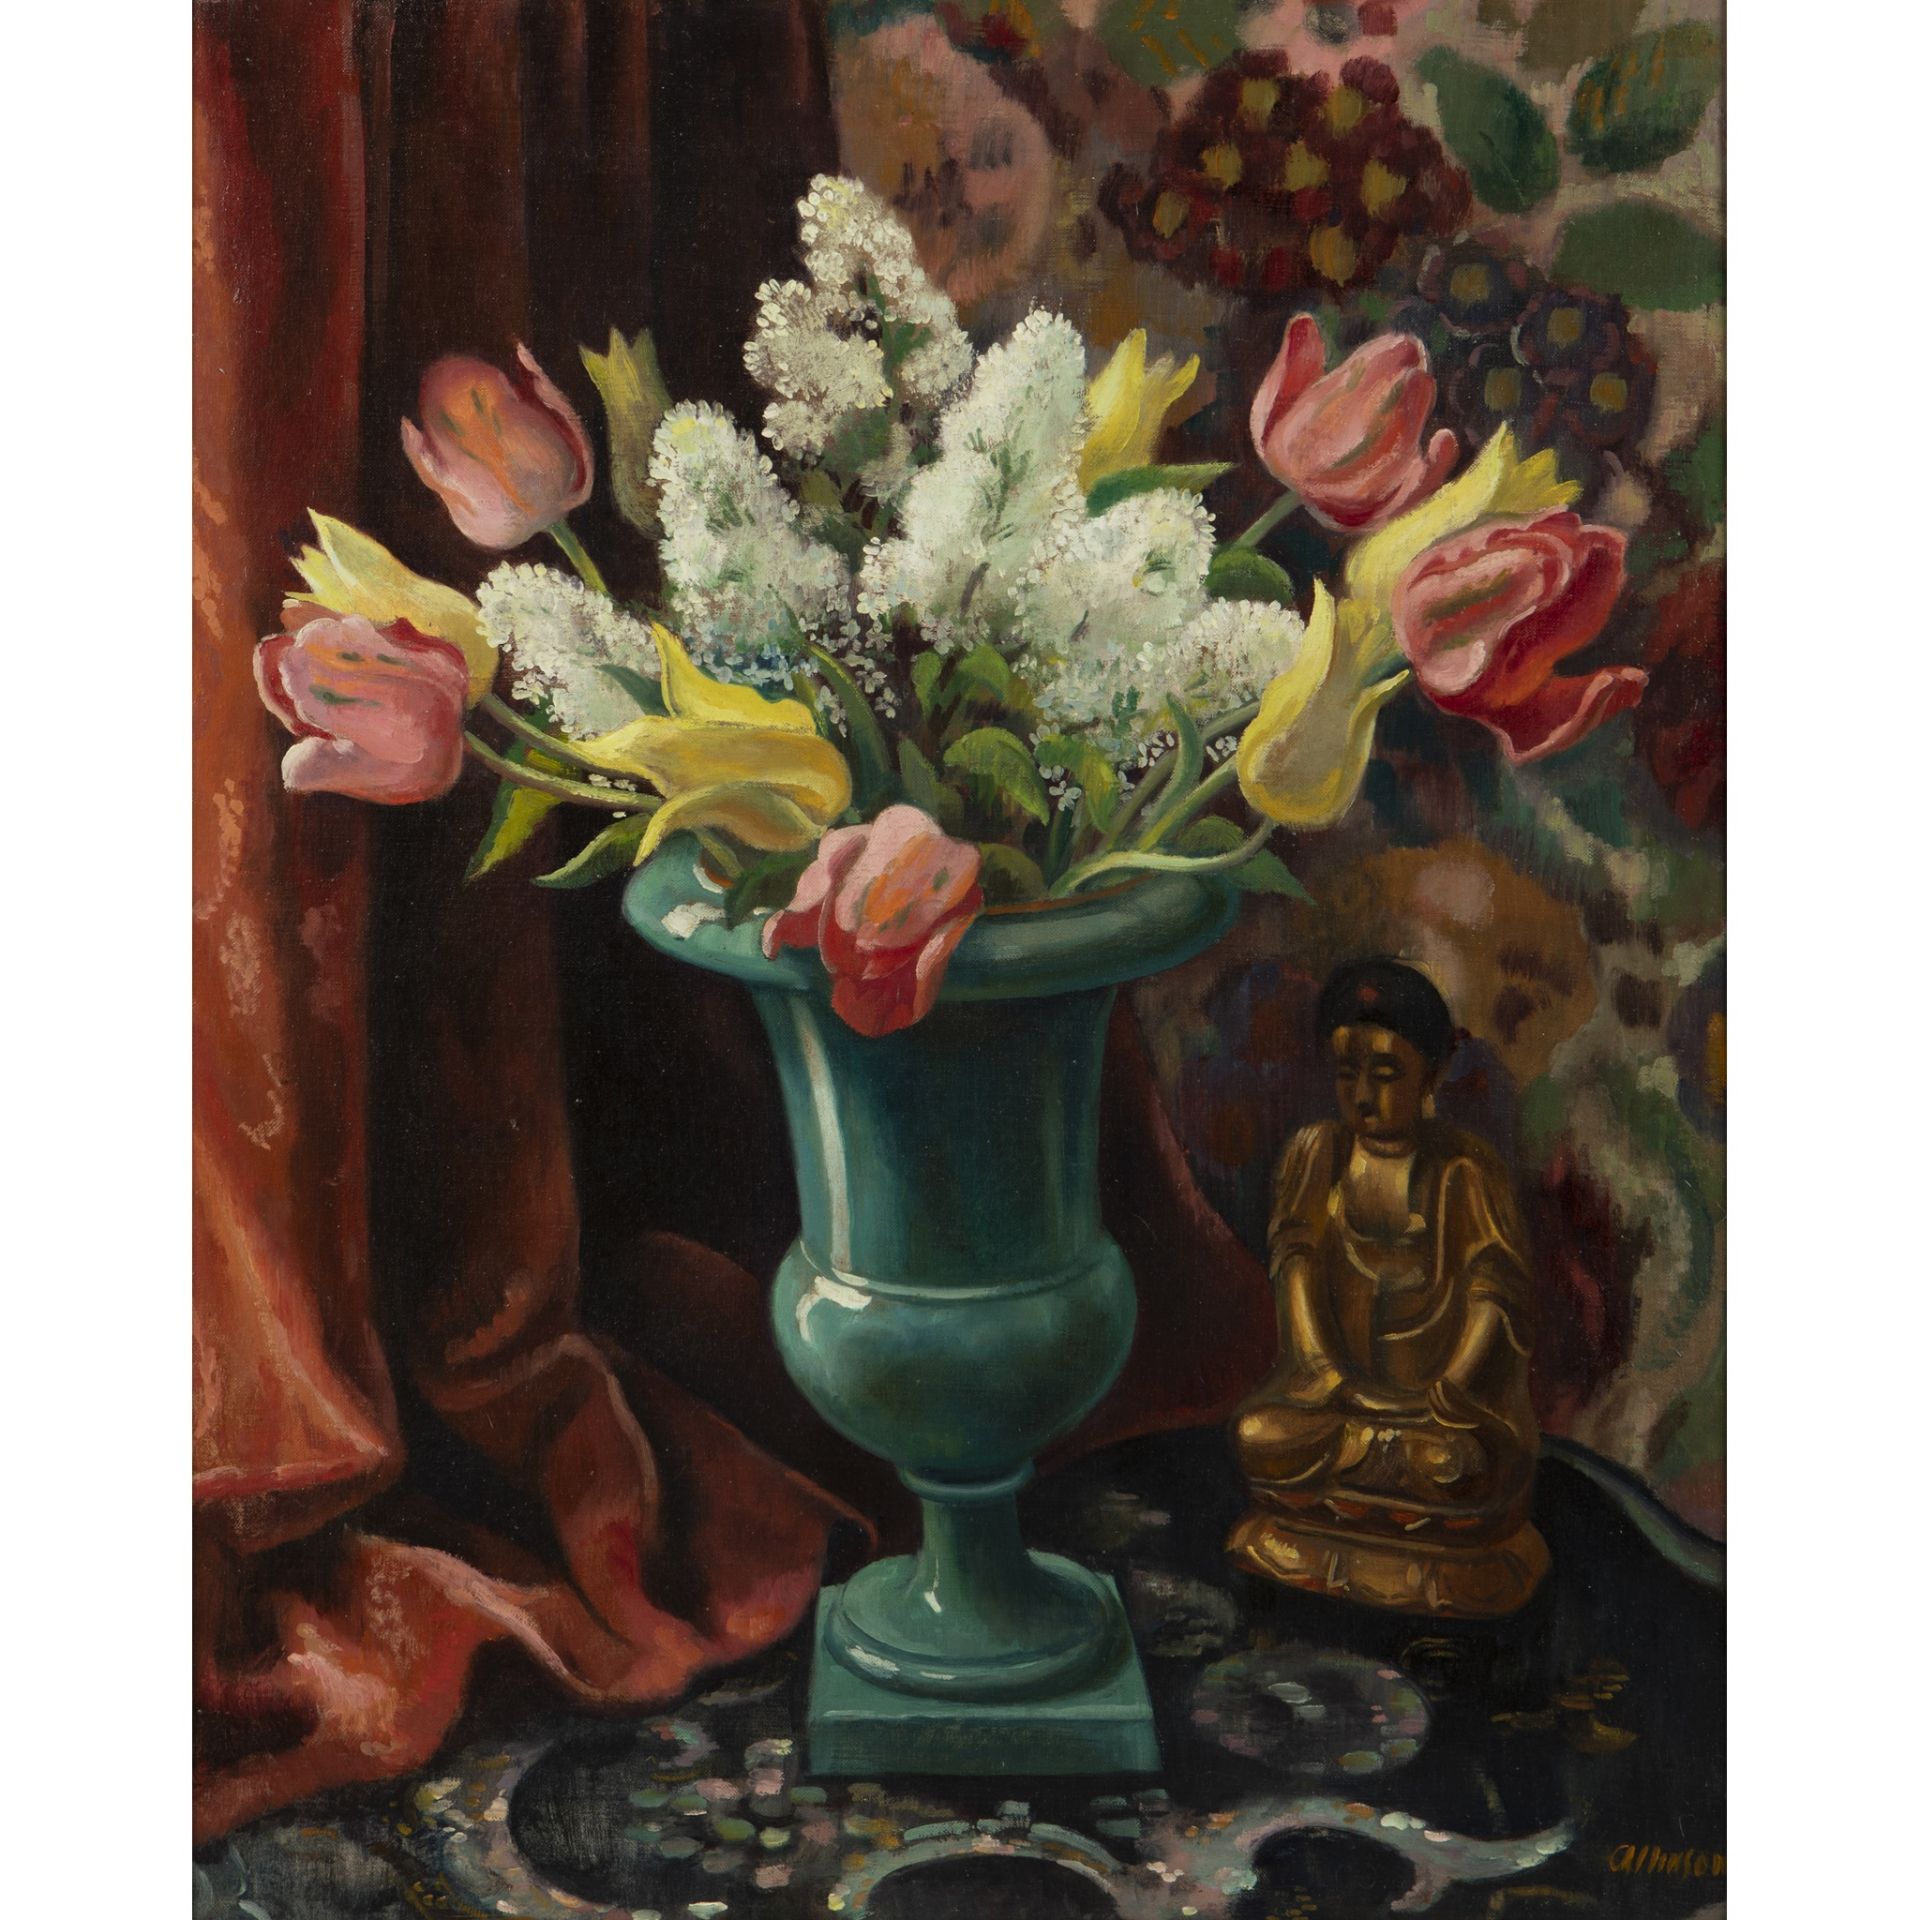 § ADRIAN ALLINSON (BRITISH 1890-1959) STILL LIFE WITH FLOWERS AND STATUE